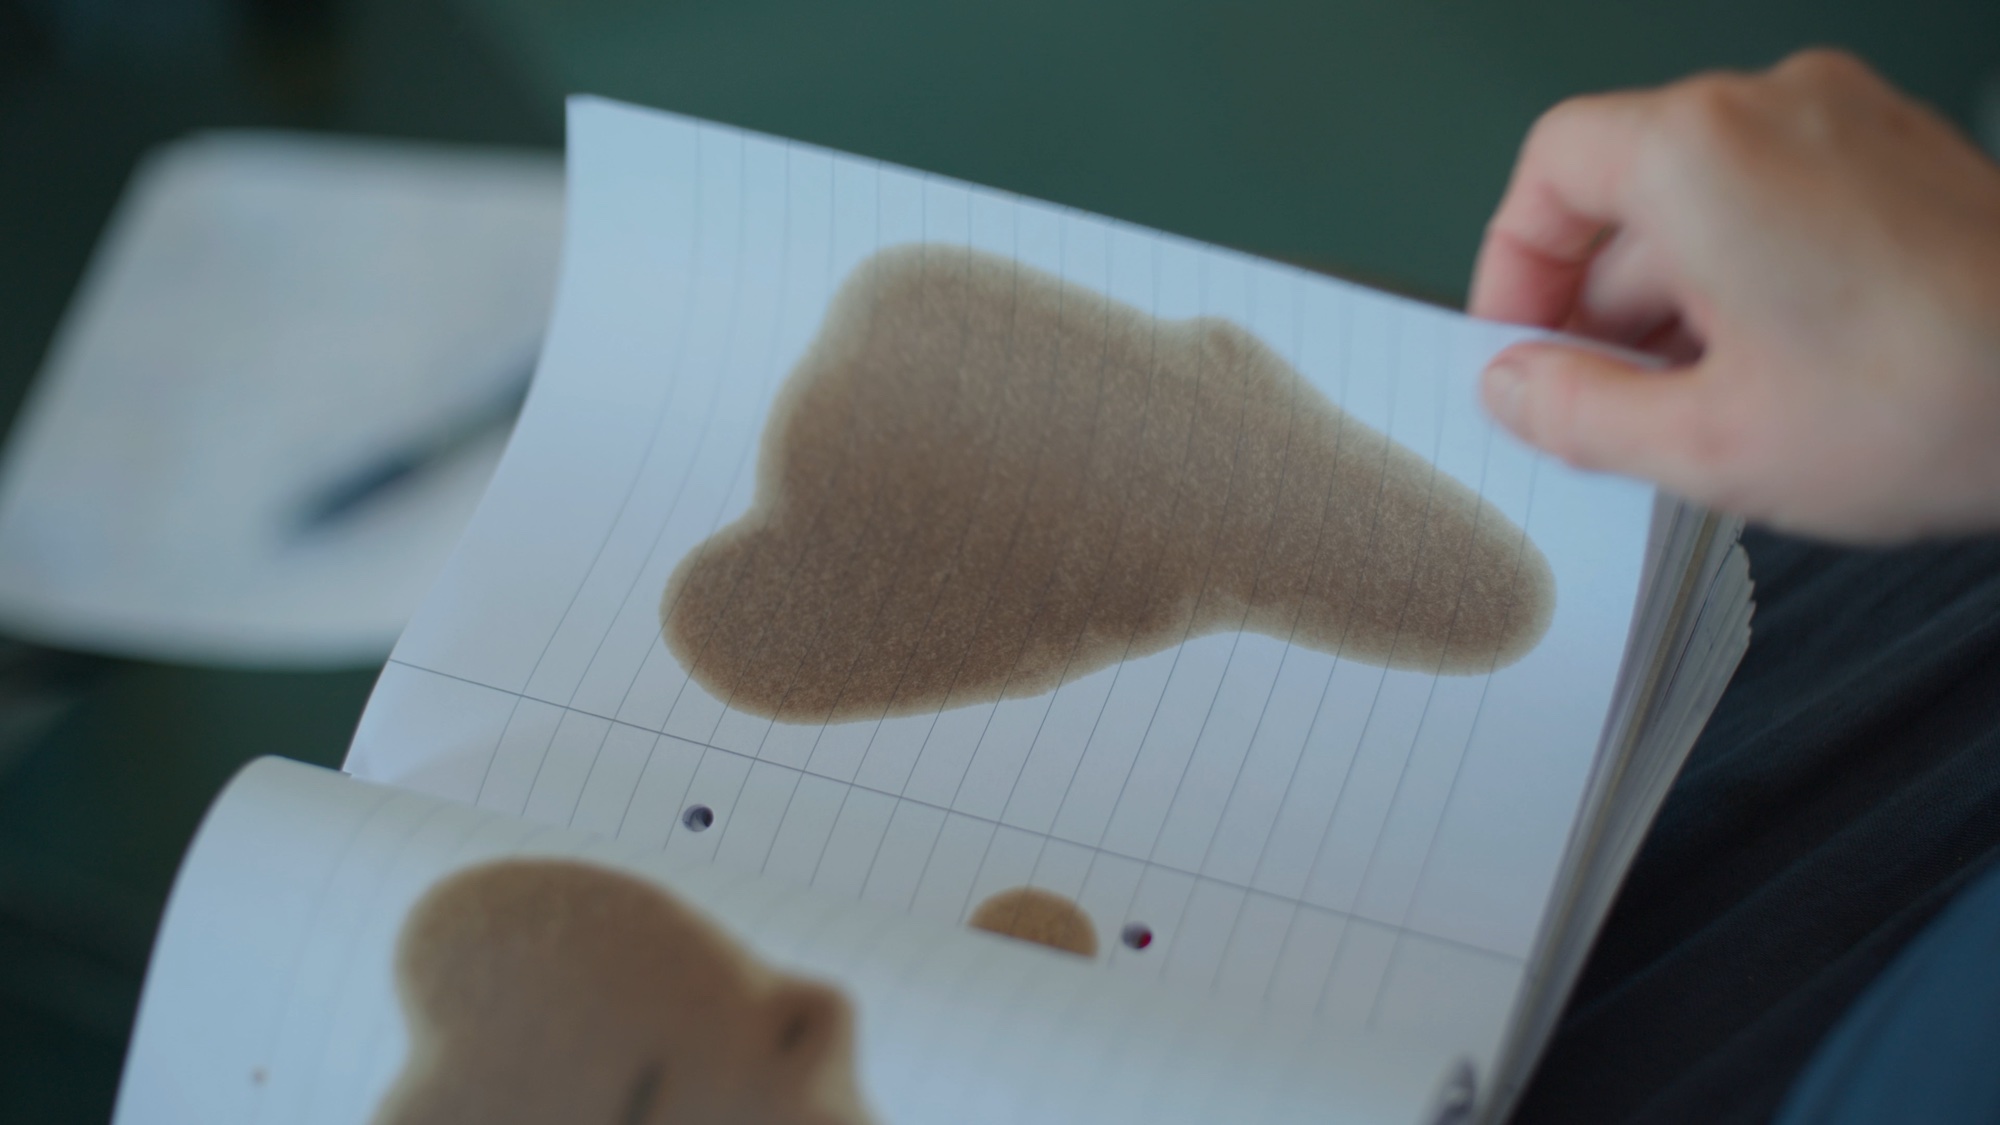 A hand turning a page of a notebook, which has a brown stain